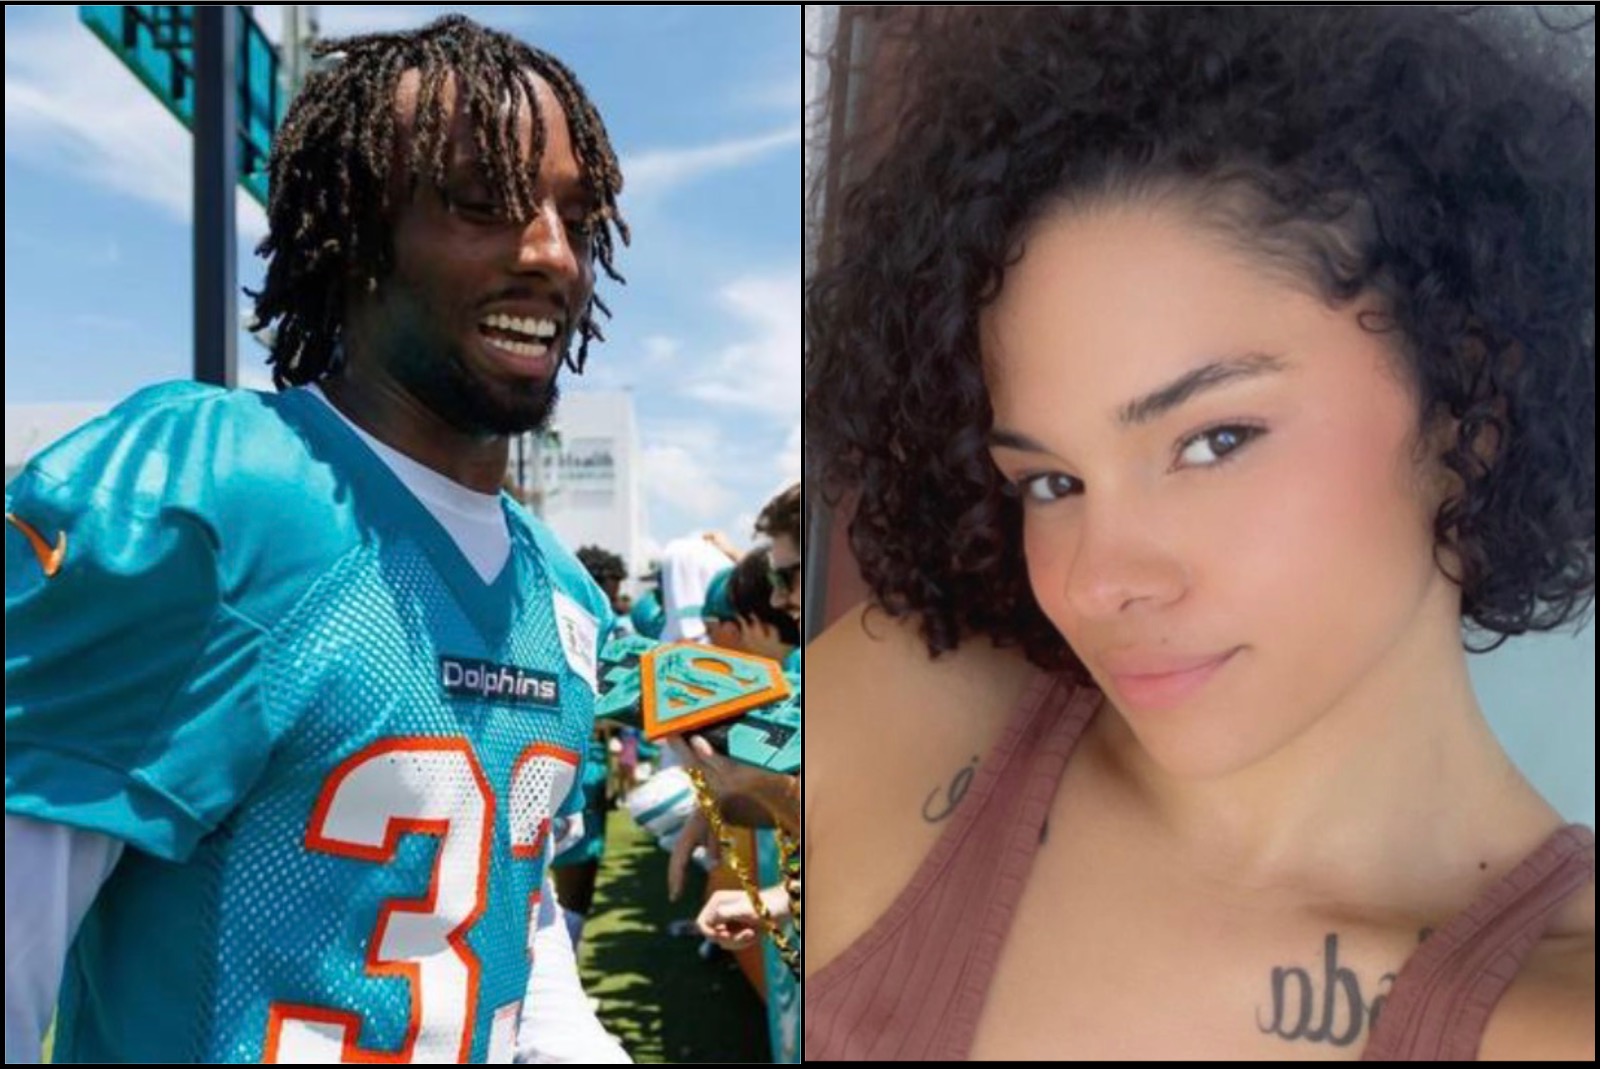 IG Model Destani Offers to Pay The Fines Of Any NFL Player Who Injures Her Latest NFL Baby Daddy Eli Apple